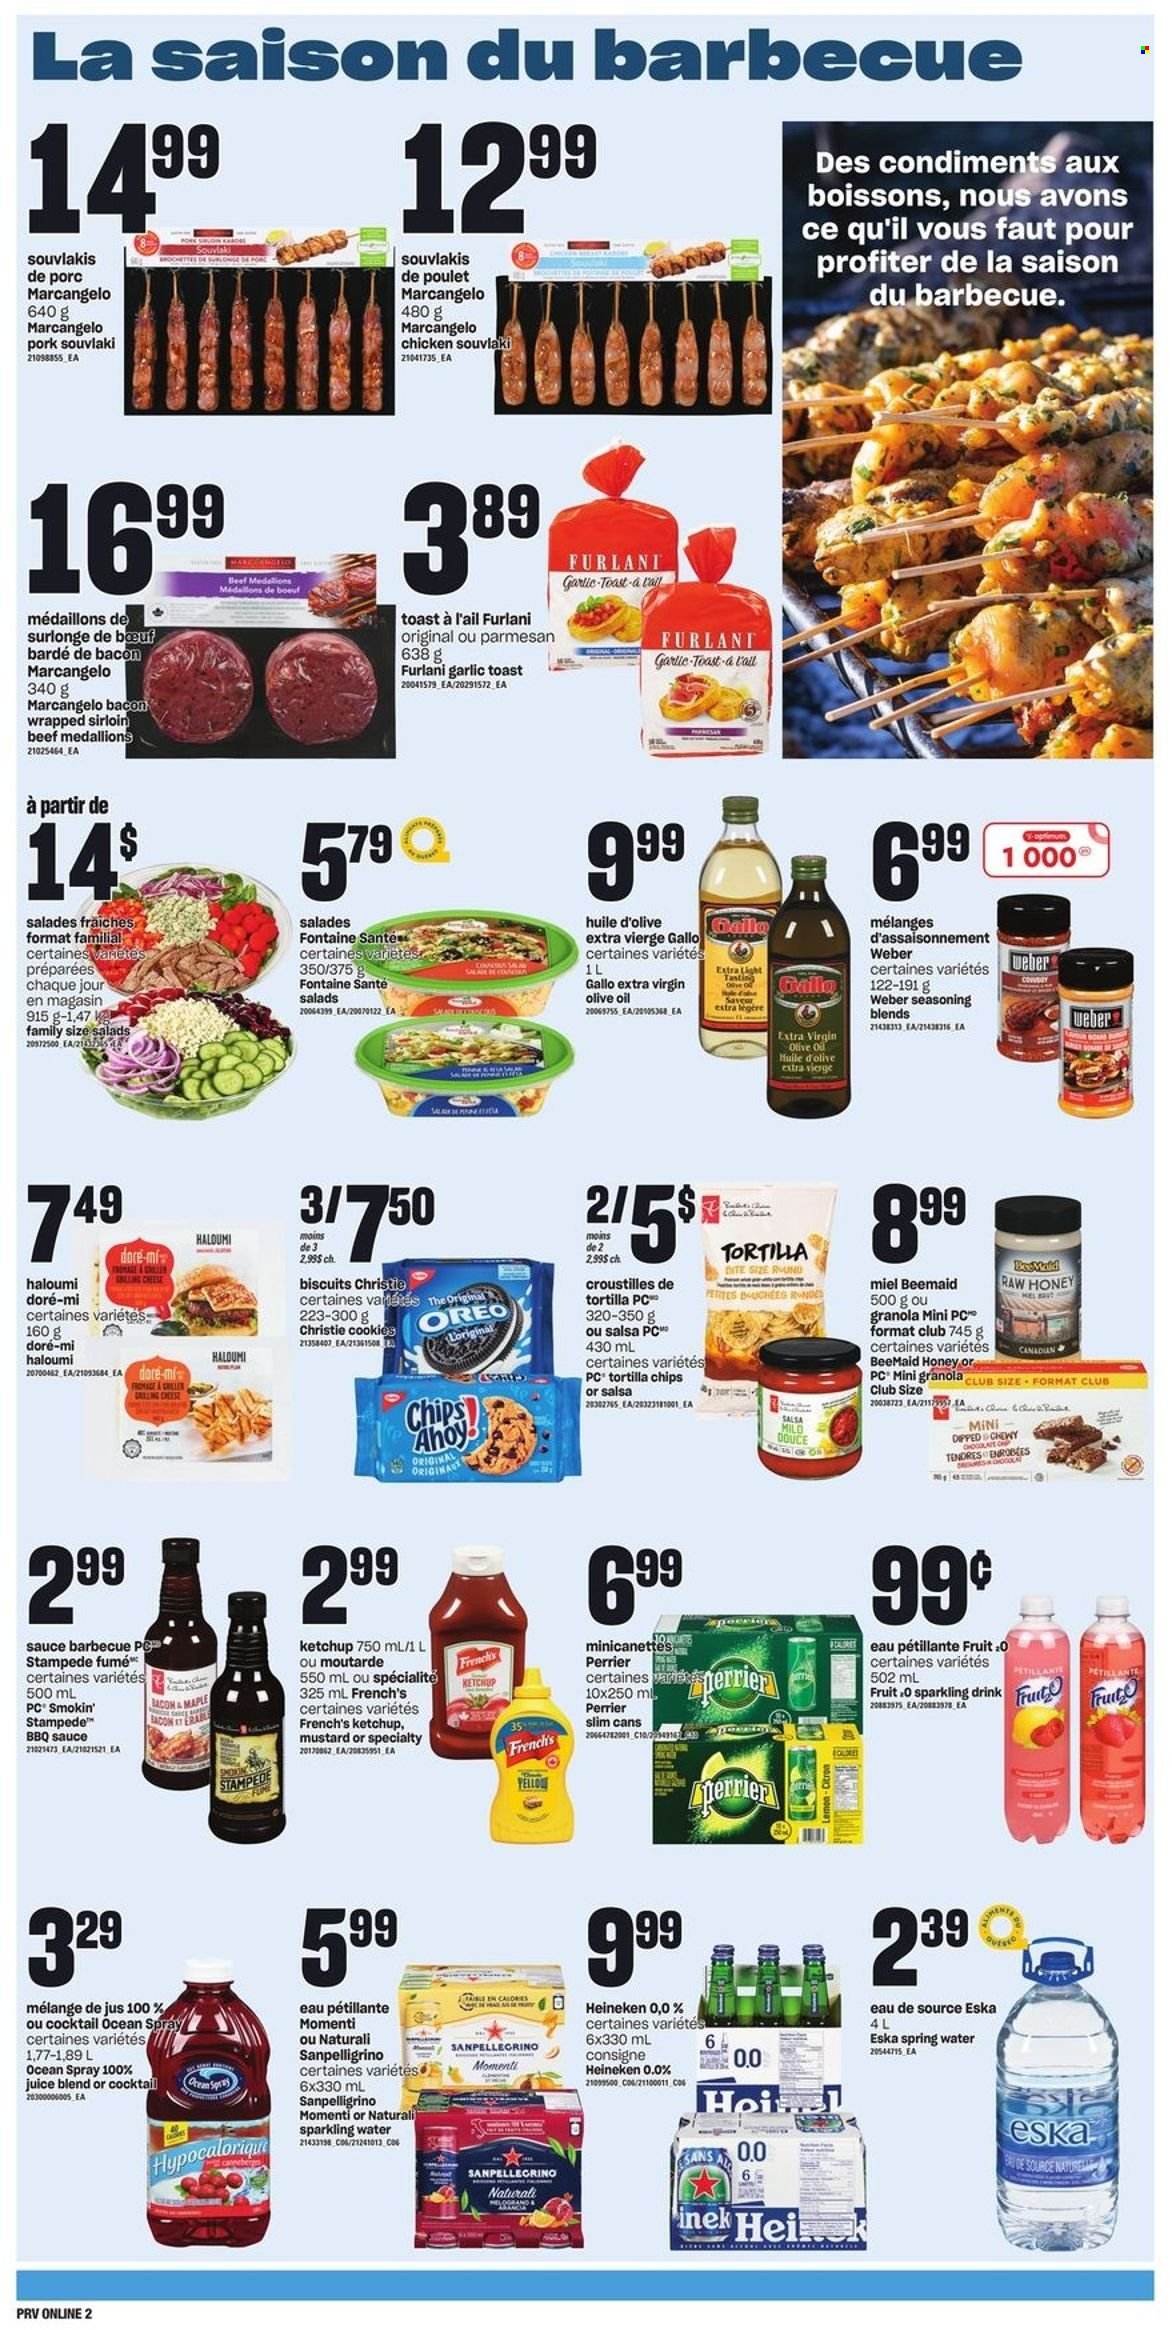 thumbnail - Provigo Flyer - June 30, 2022 - July 06, 2022 - Sales products - sauce, bacon, parmesan, cheese, Milo, cookies, biscuit, tortilla chips, chips, spice, BBQ sauce, mustard, salsa, extra virgin olive oil, olive oil, oil, juice, Perrier, spring water, sparkling water, beer, Heineken, Optimum, granola, ketchup, Oreo. Page 6.